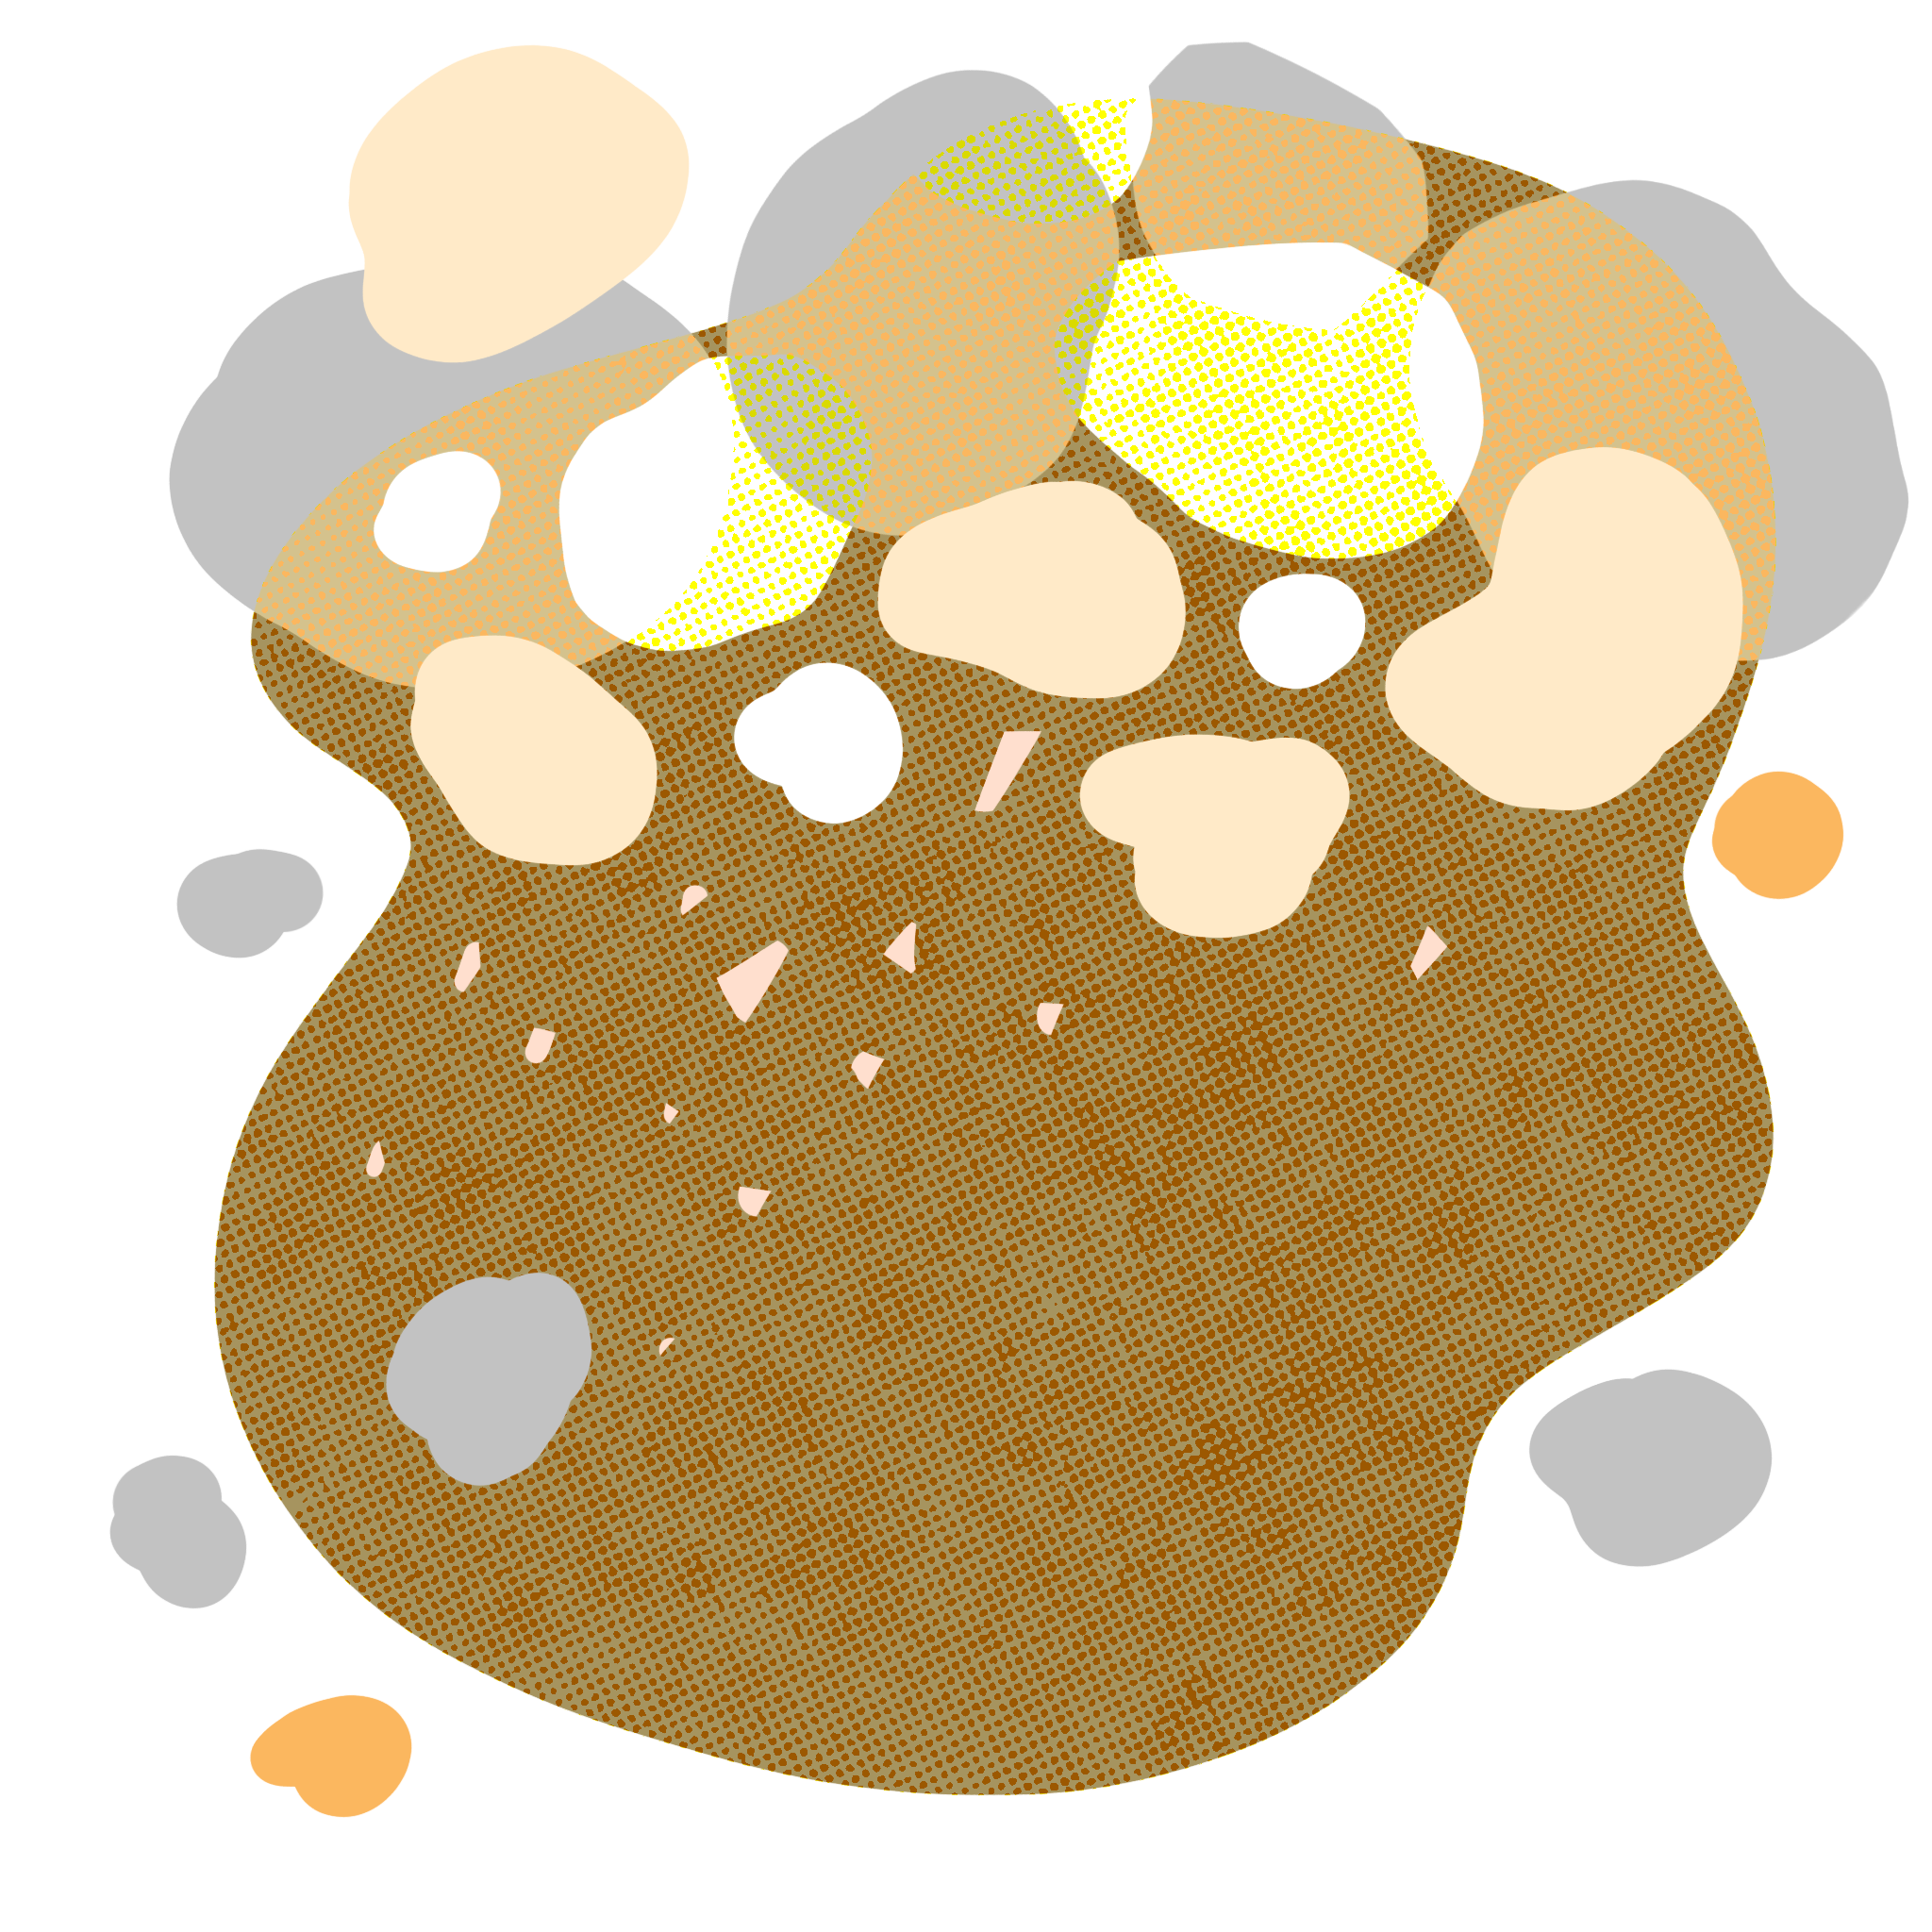 A curvy patch of light brown mottled material topped with gray, white, and beige clumps.